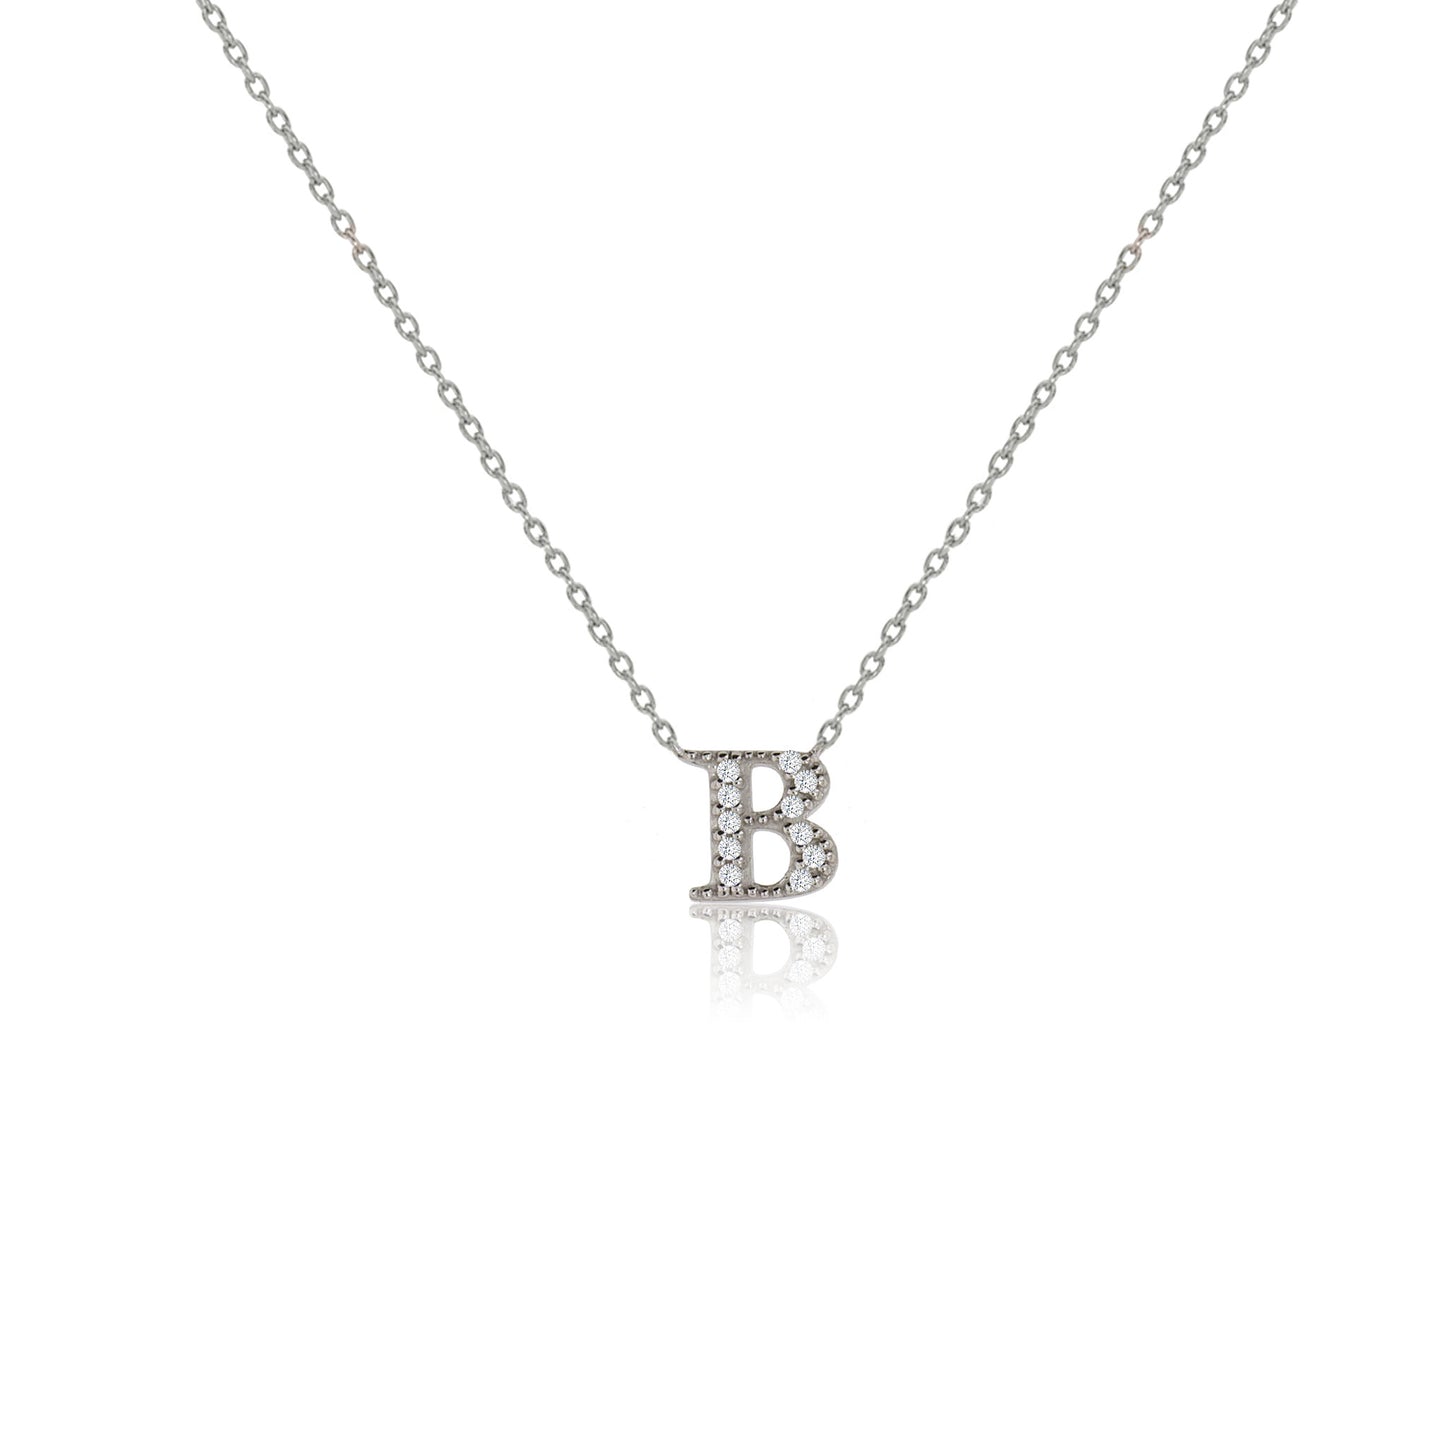 NT-26/S/B - Initial "B" Necklace with Sliding Length Adjuster